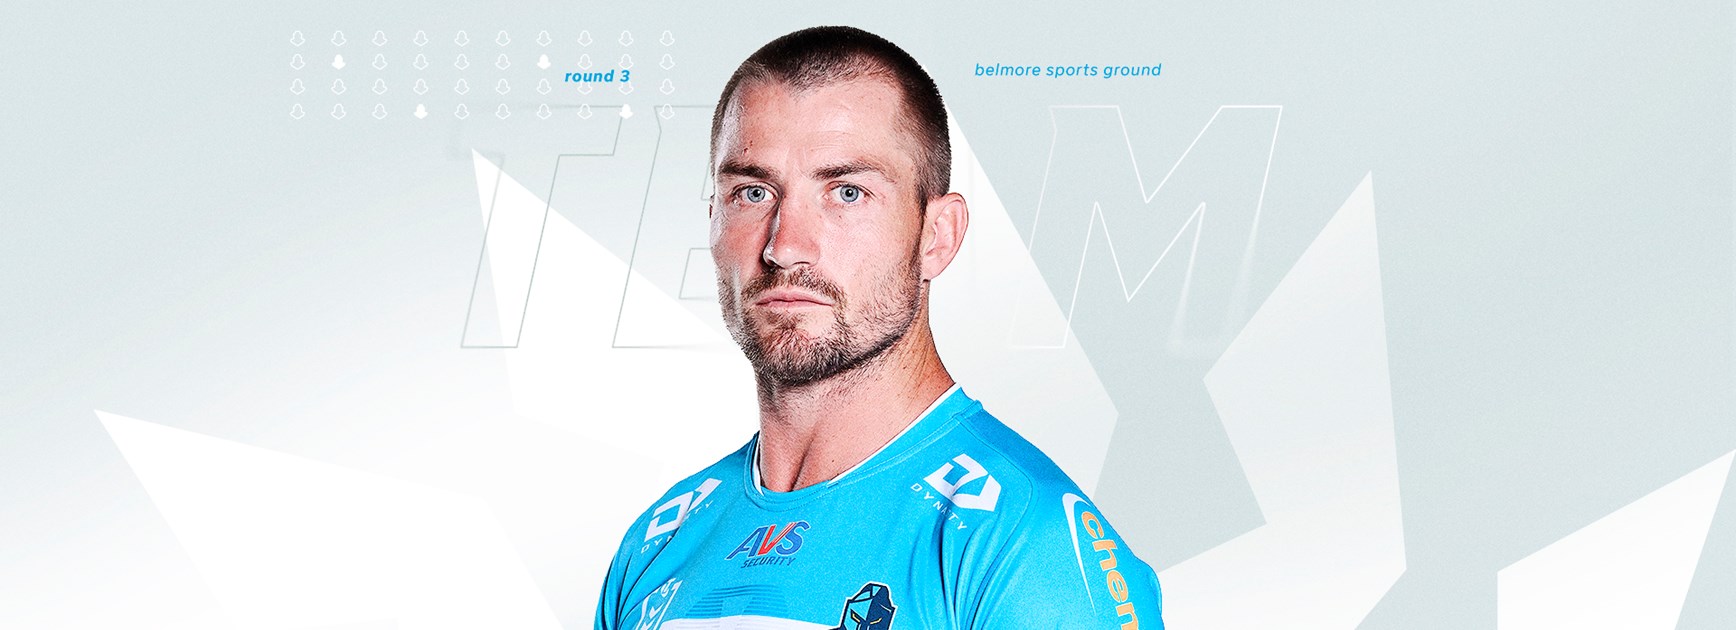 Round 3 team: Foran returns to old stomping ground as Hasler makes lock switch